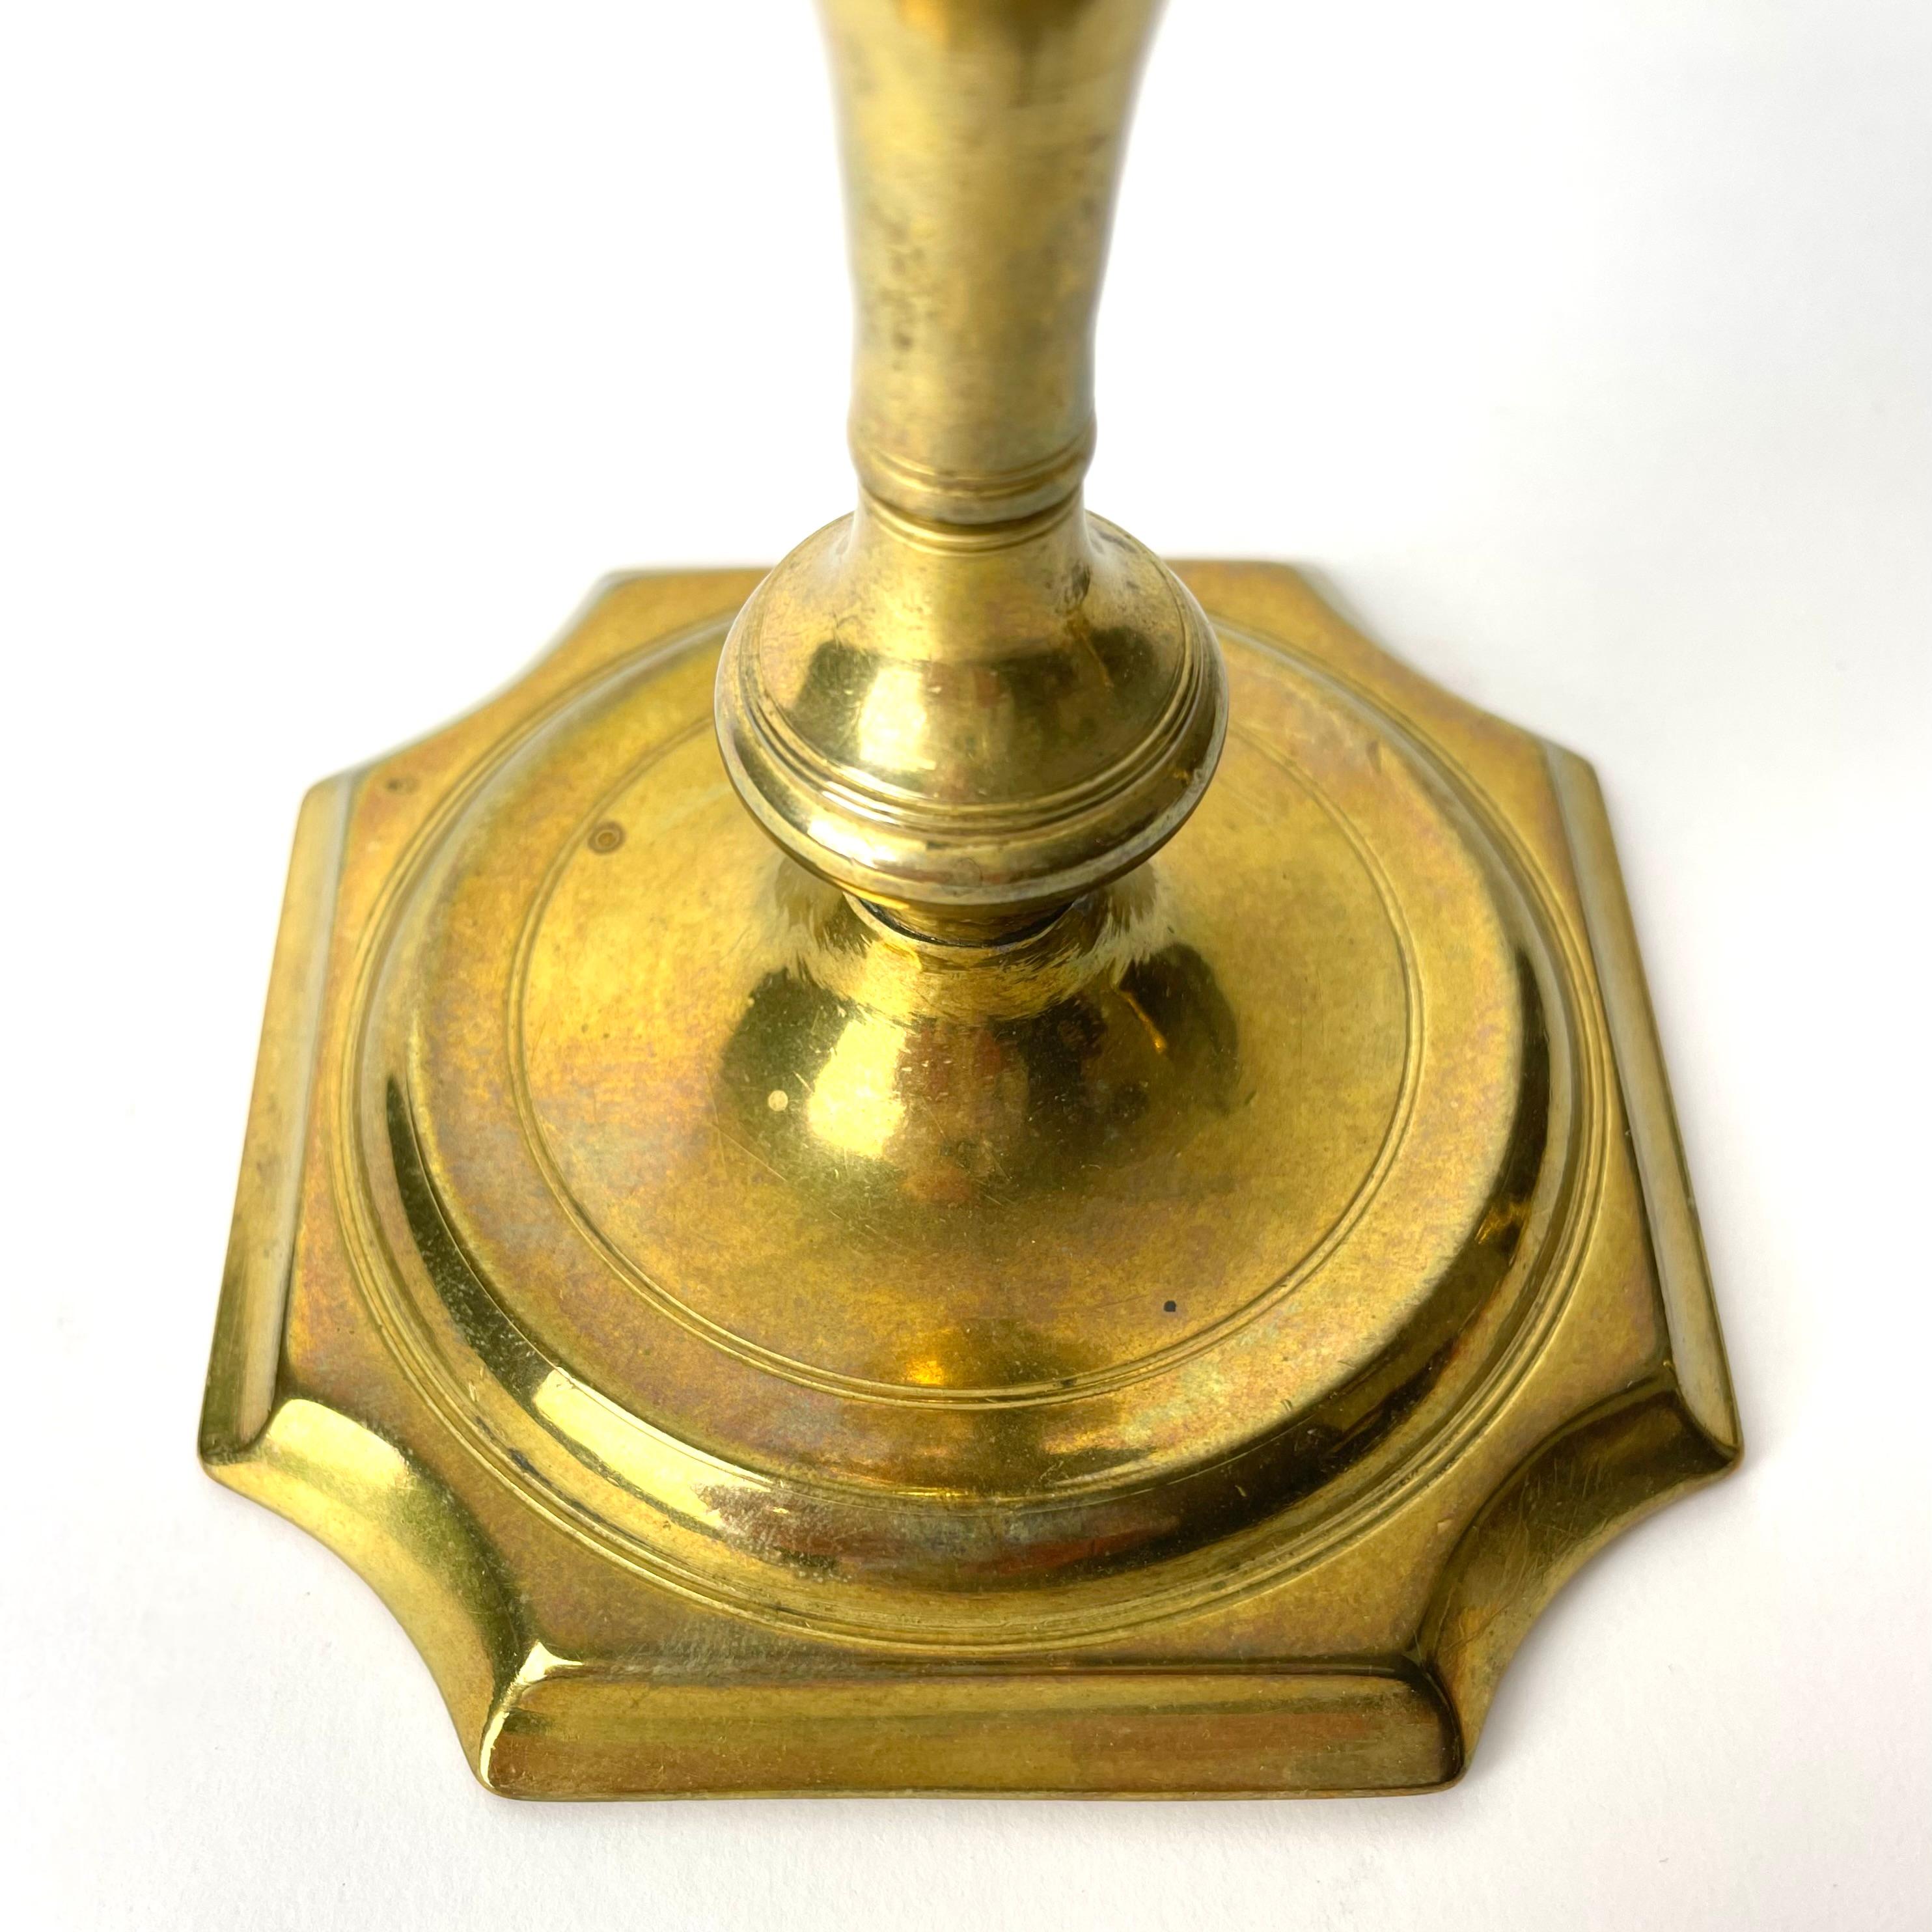 A Pair of 2 Lovely Brass Candlesticks, Late Baroque, Early 18th Century For Sale 1